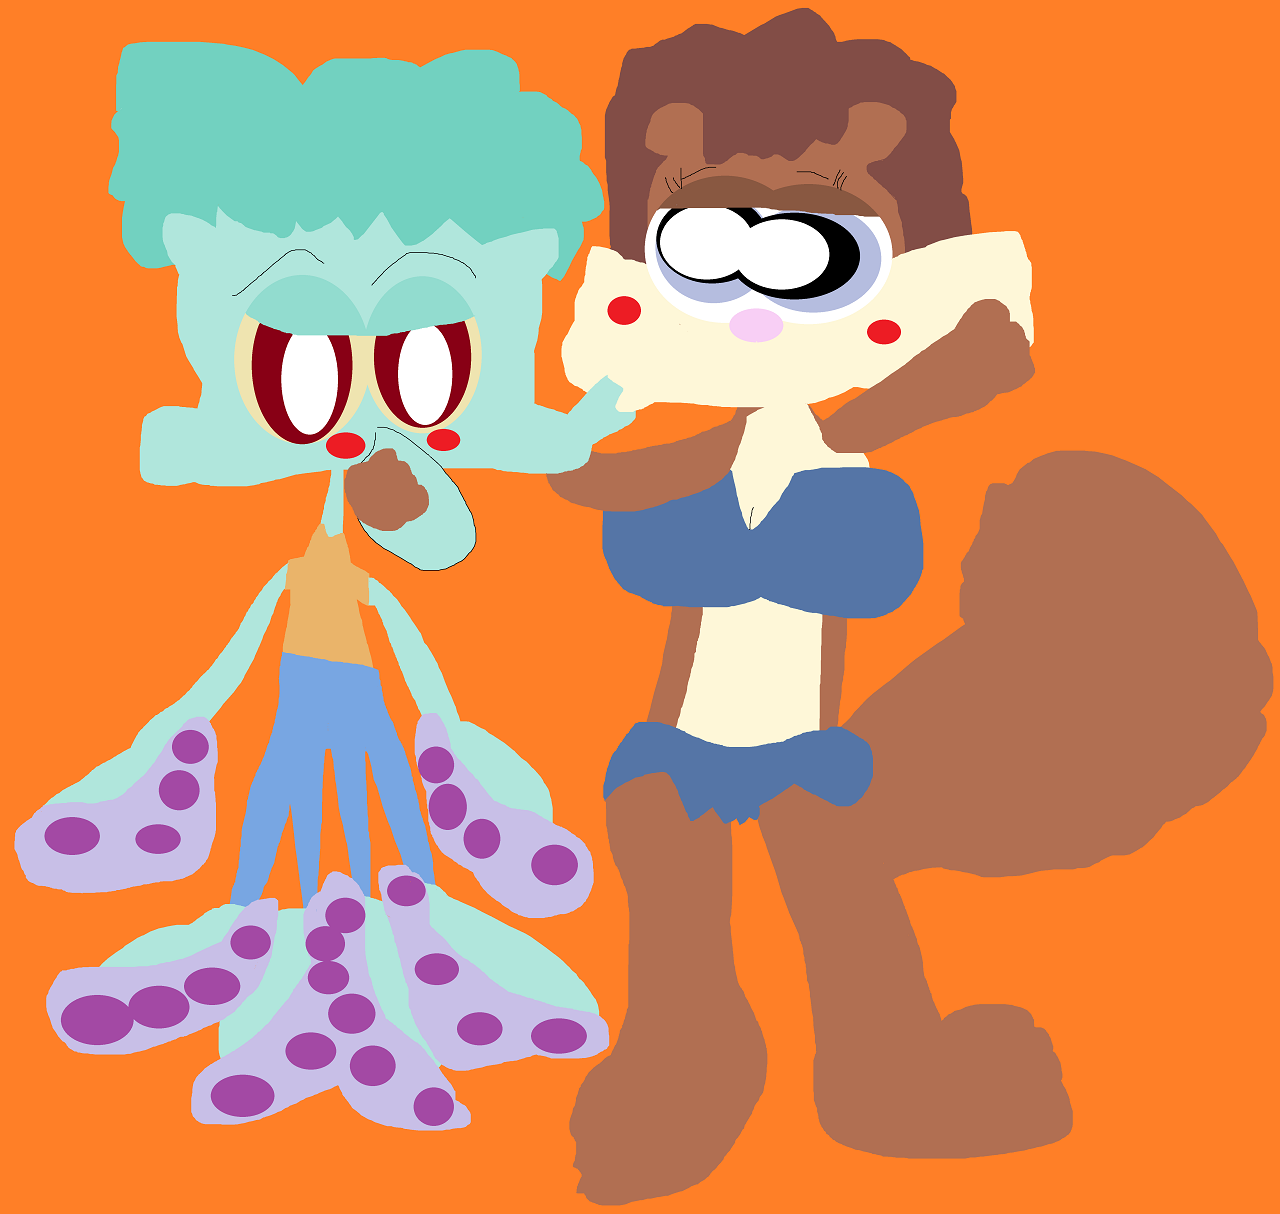 Squidward And Sandy In A Mix Of Styles Alt^^ by Falconlobo